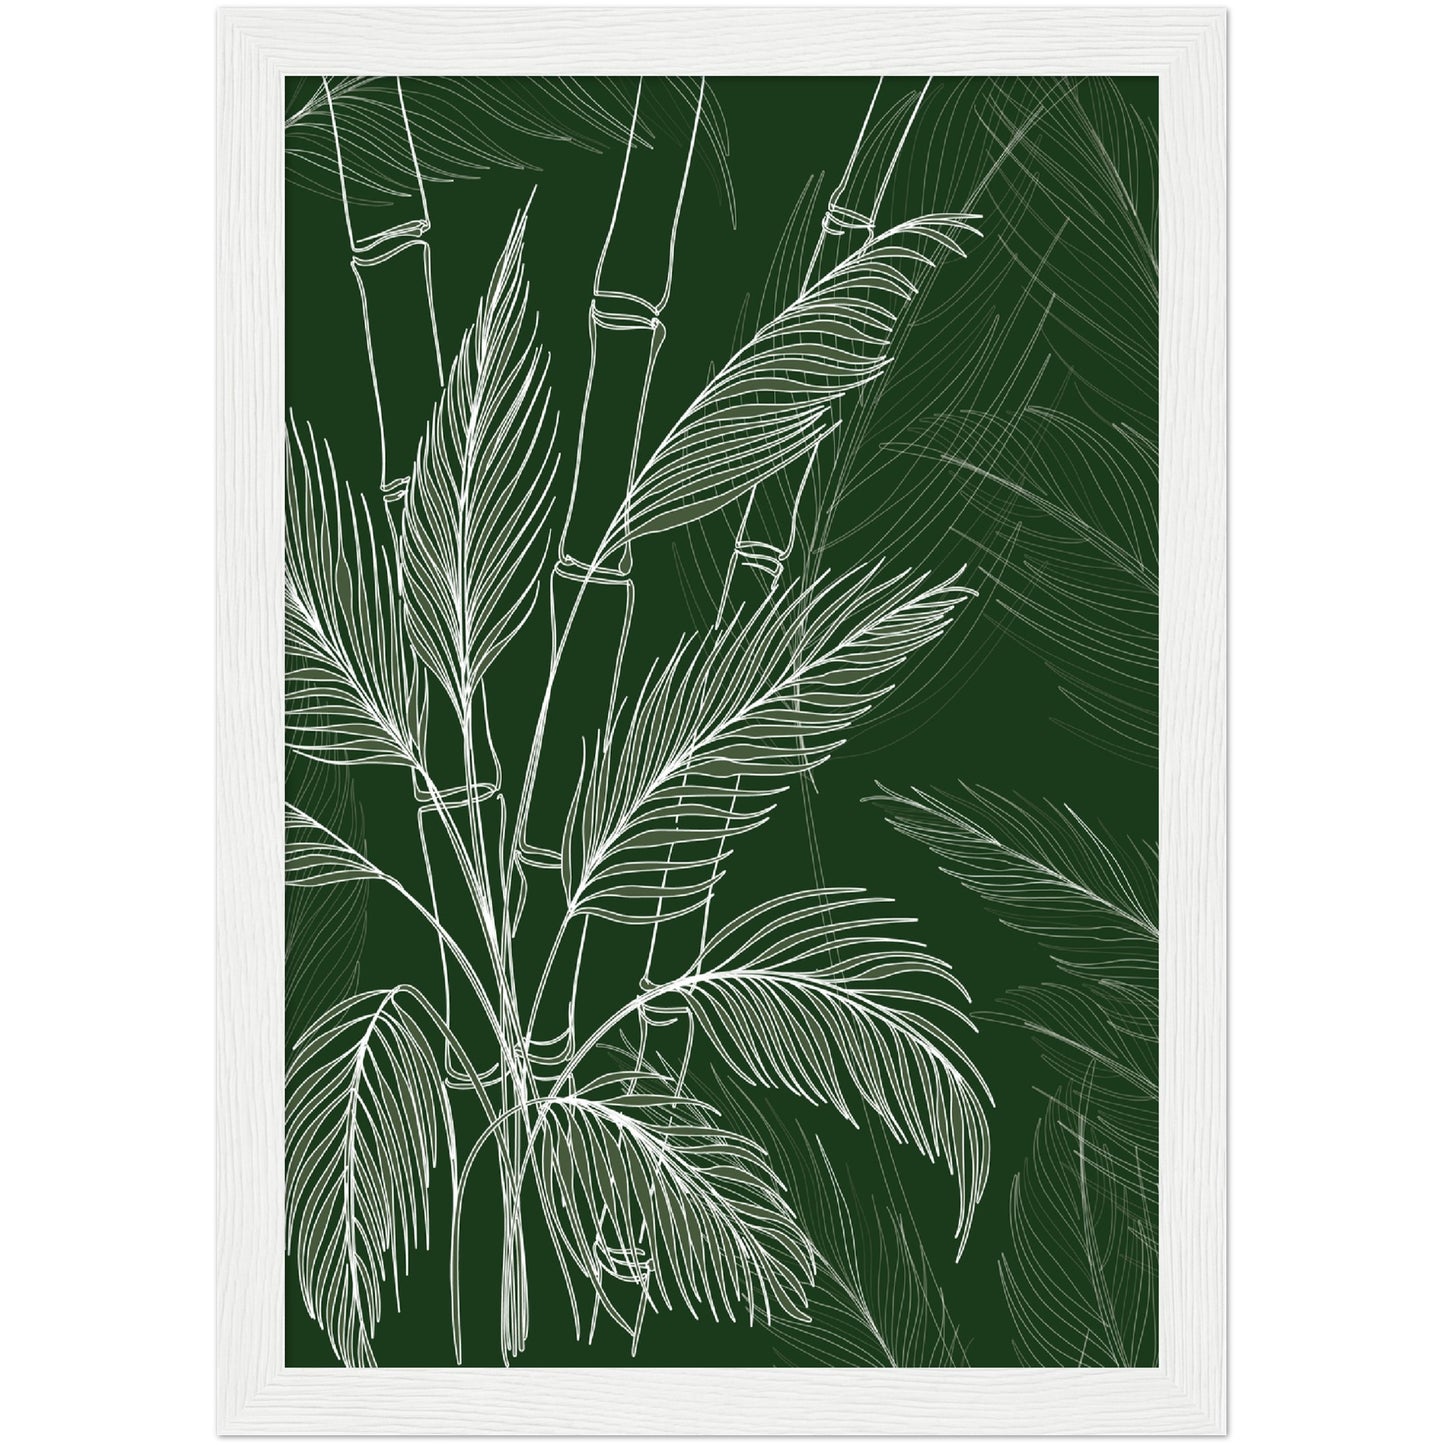 Bamboo Forest Print